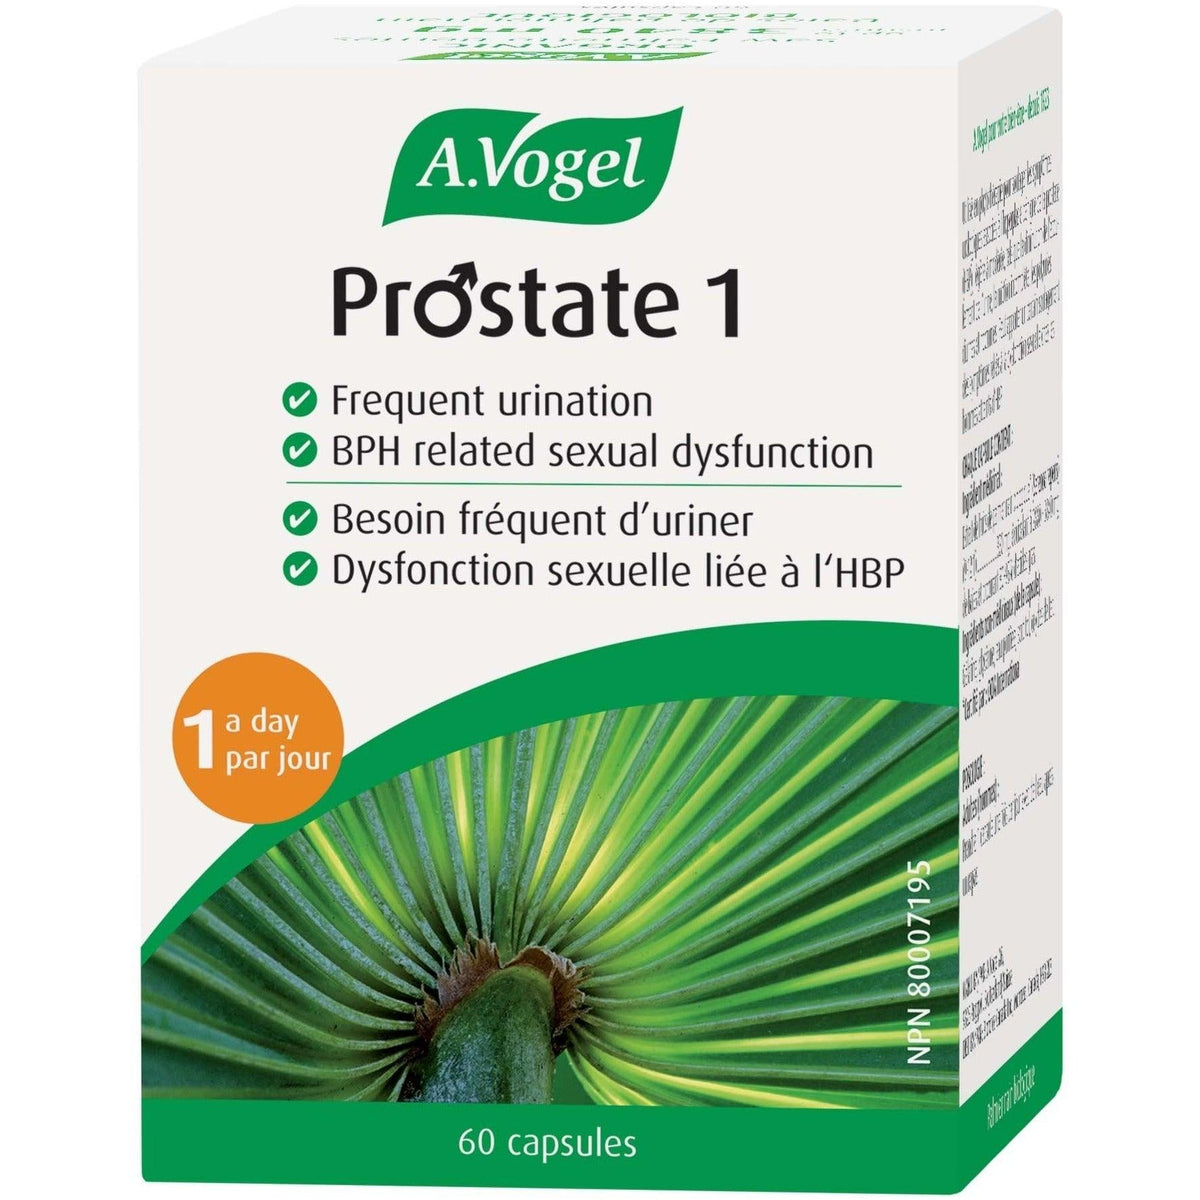 A. Vogel Prostate 1 60 Capsules Supplements - Prostate at Village Vitamin Store